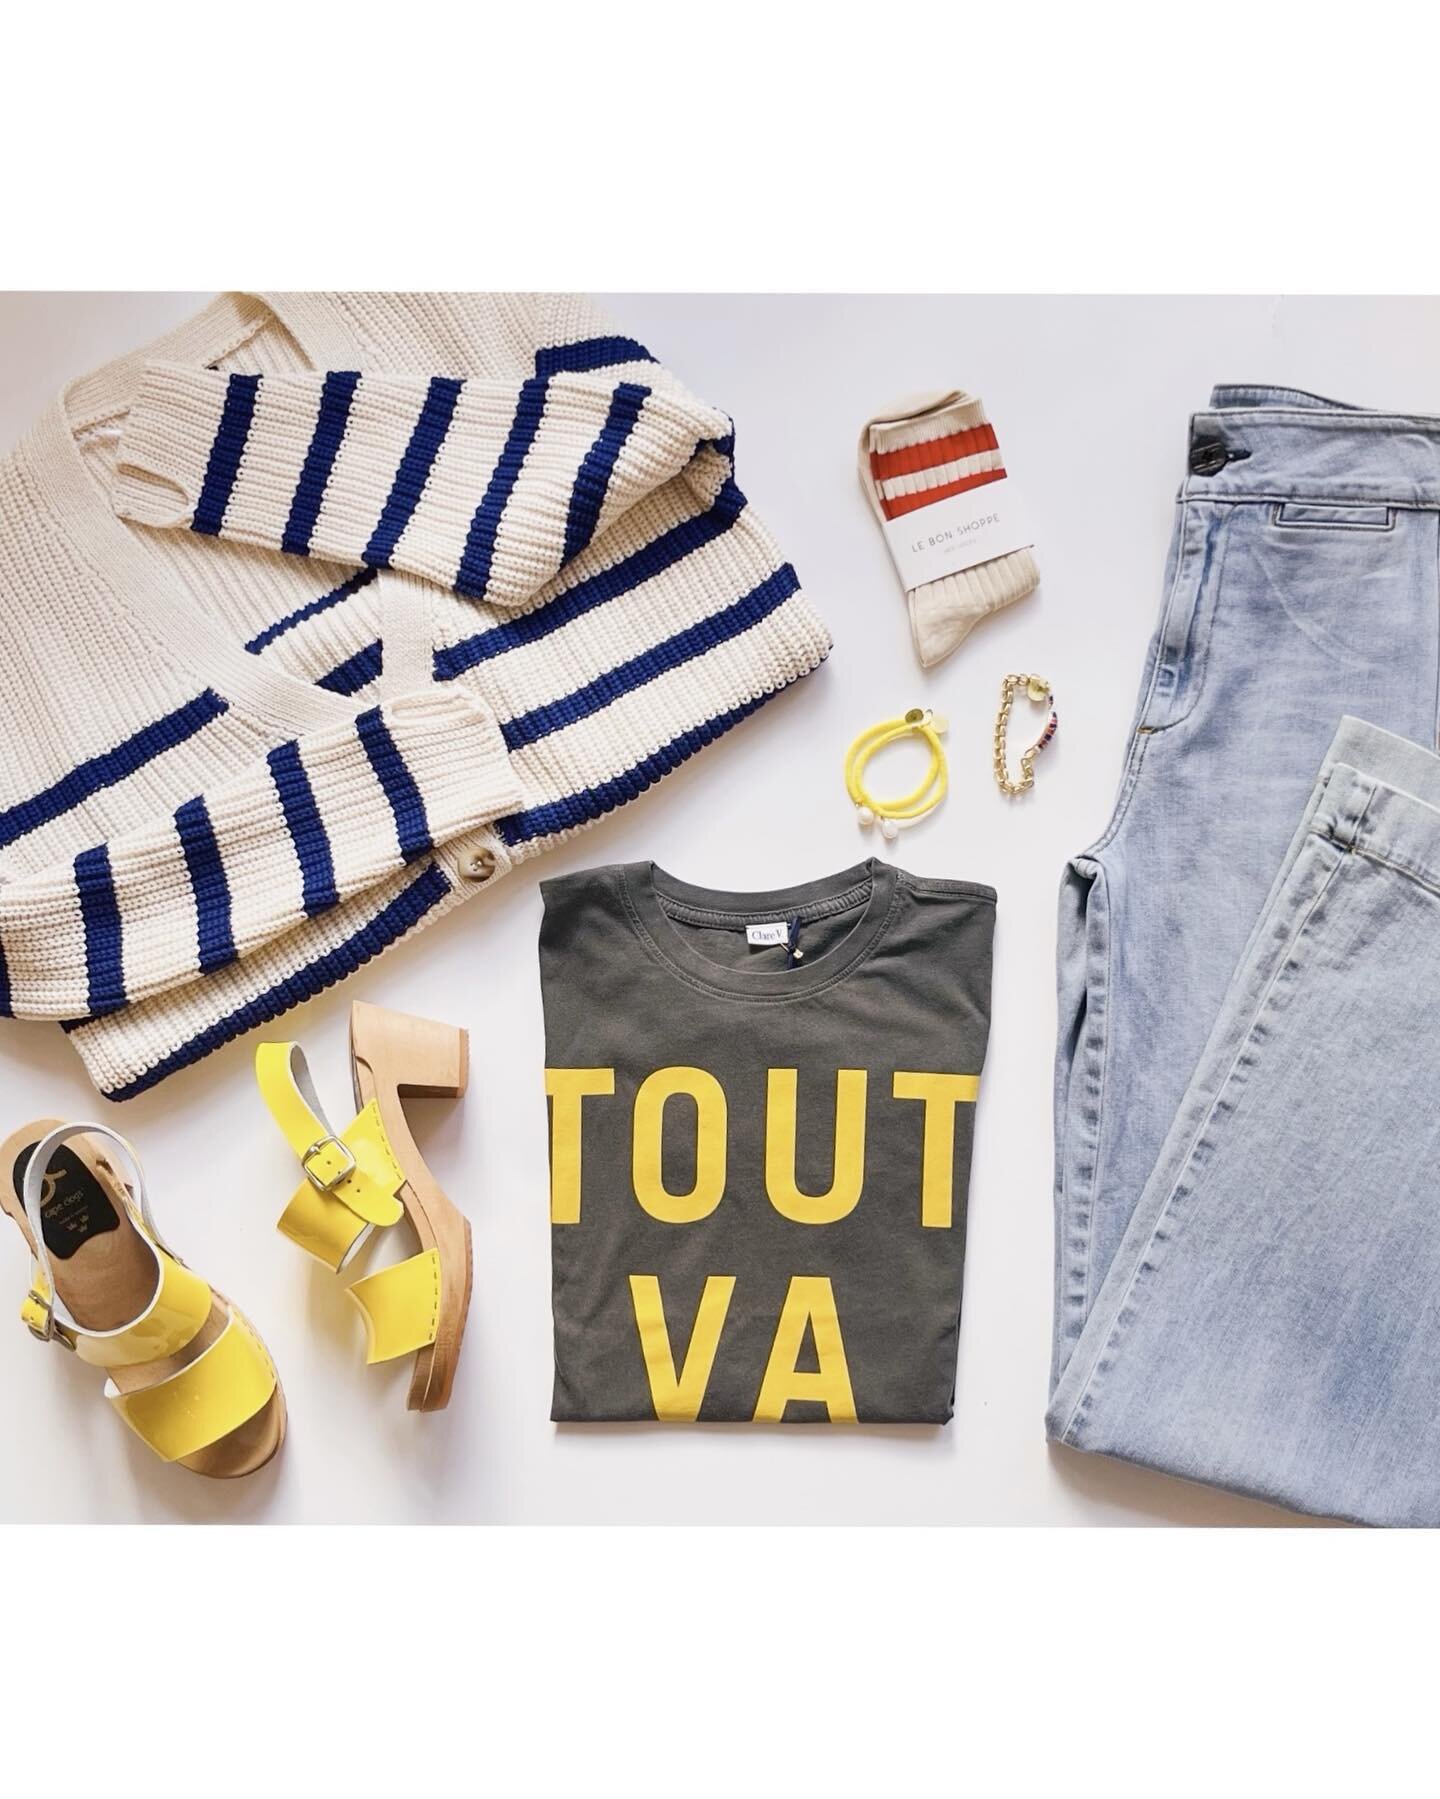 I made a little outfit mood board for you. Clare V &ldquo;Tout Va Bien&rdquo; tee back in stock 💛. Paired here with our striped cotton oversized sweater, and @askkny jeans. All in store now even the yellow clogs, @lebonshoppe socks and bracelets #to